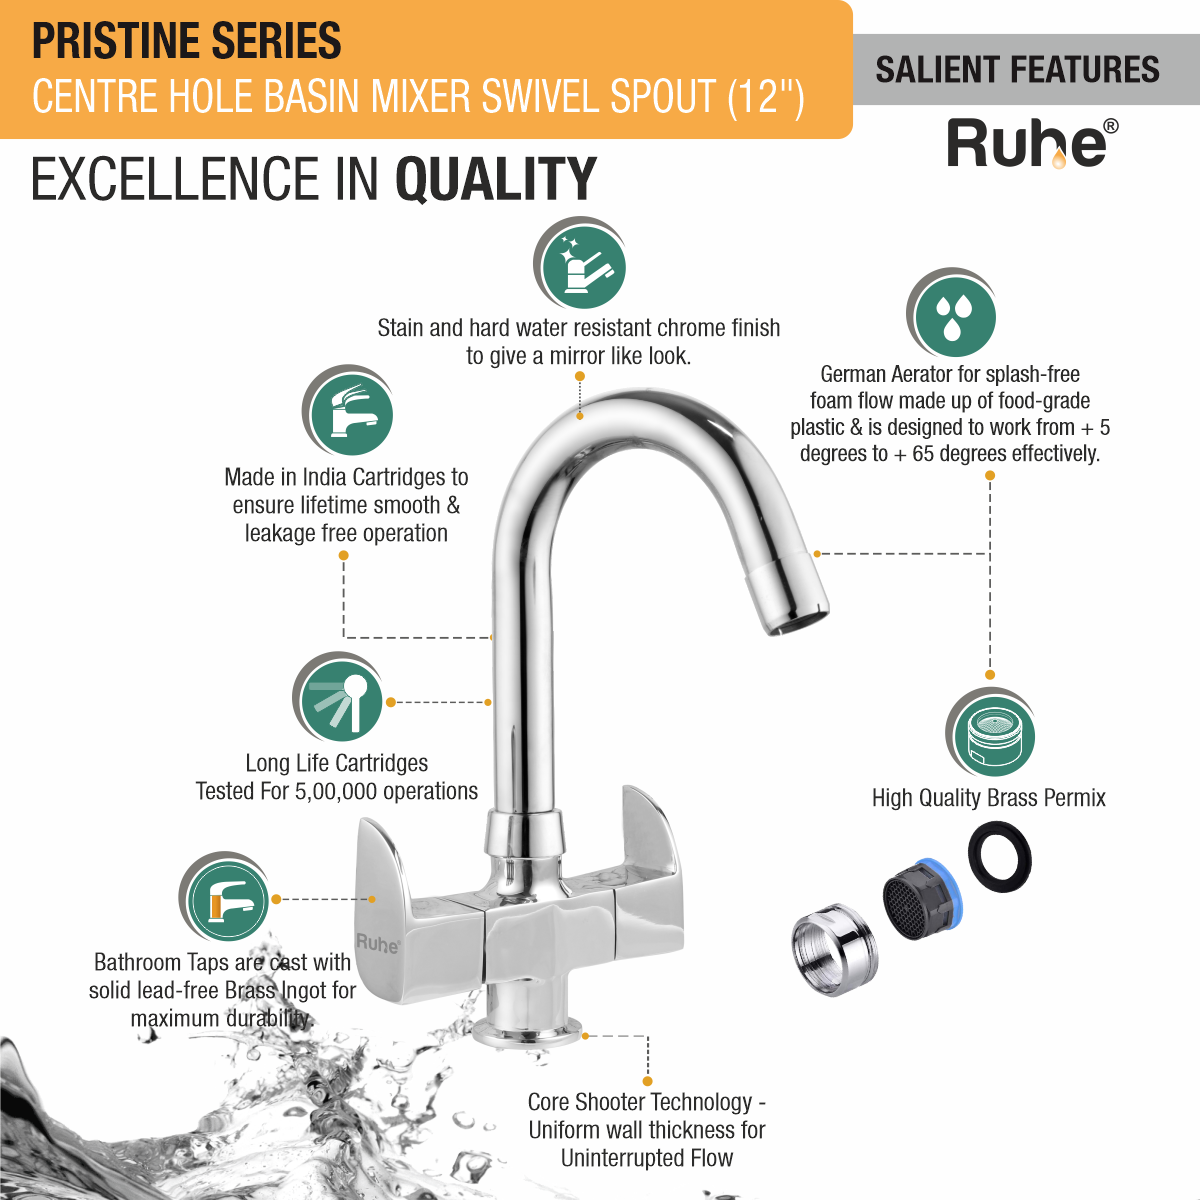 Pristine Centre Hole Basin Mixer with Small (12 inches) Round Swivel Spout Faucet features